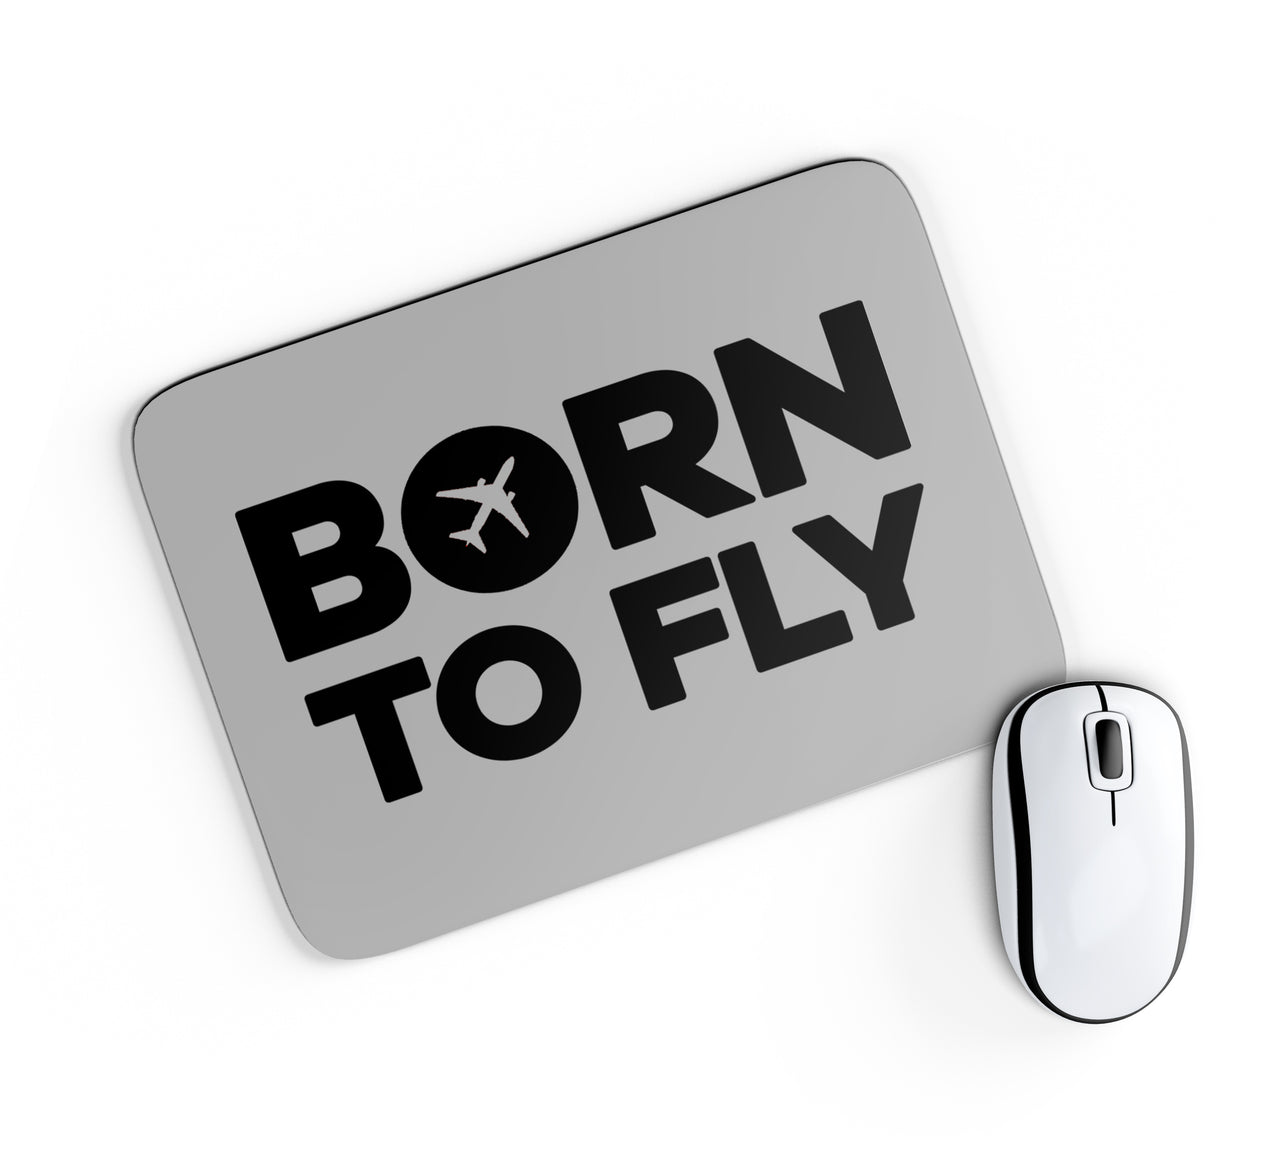 Born To Fly Special Designed Mouse Pads